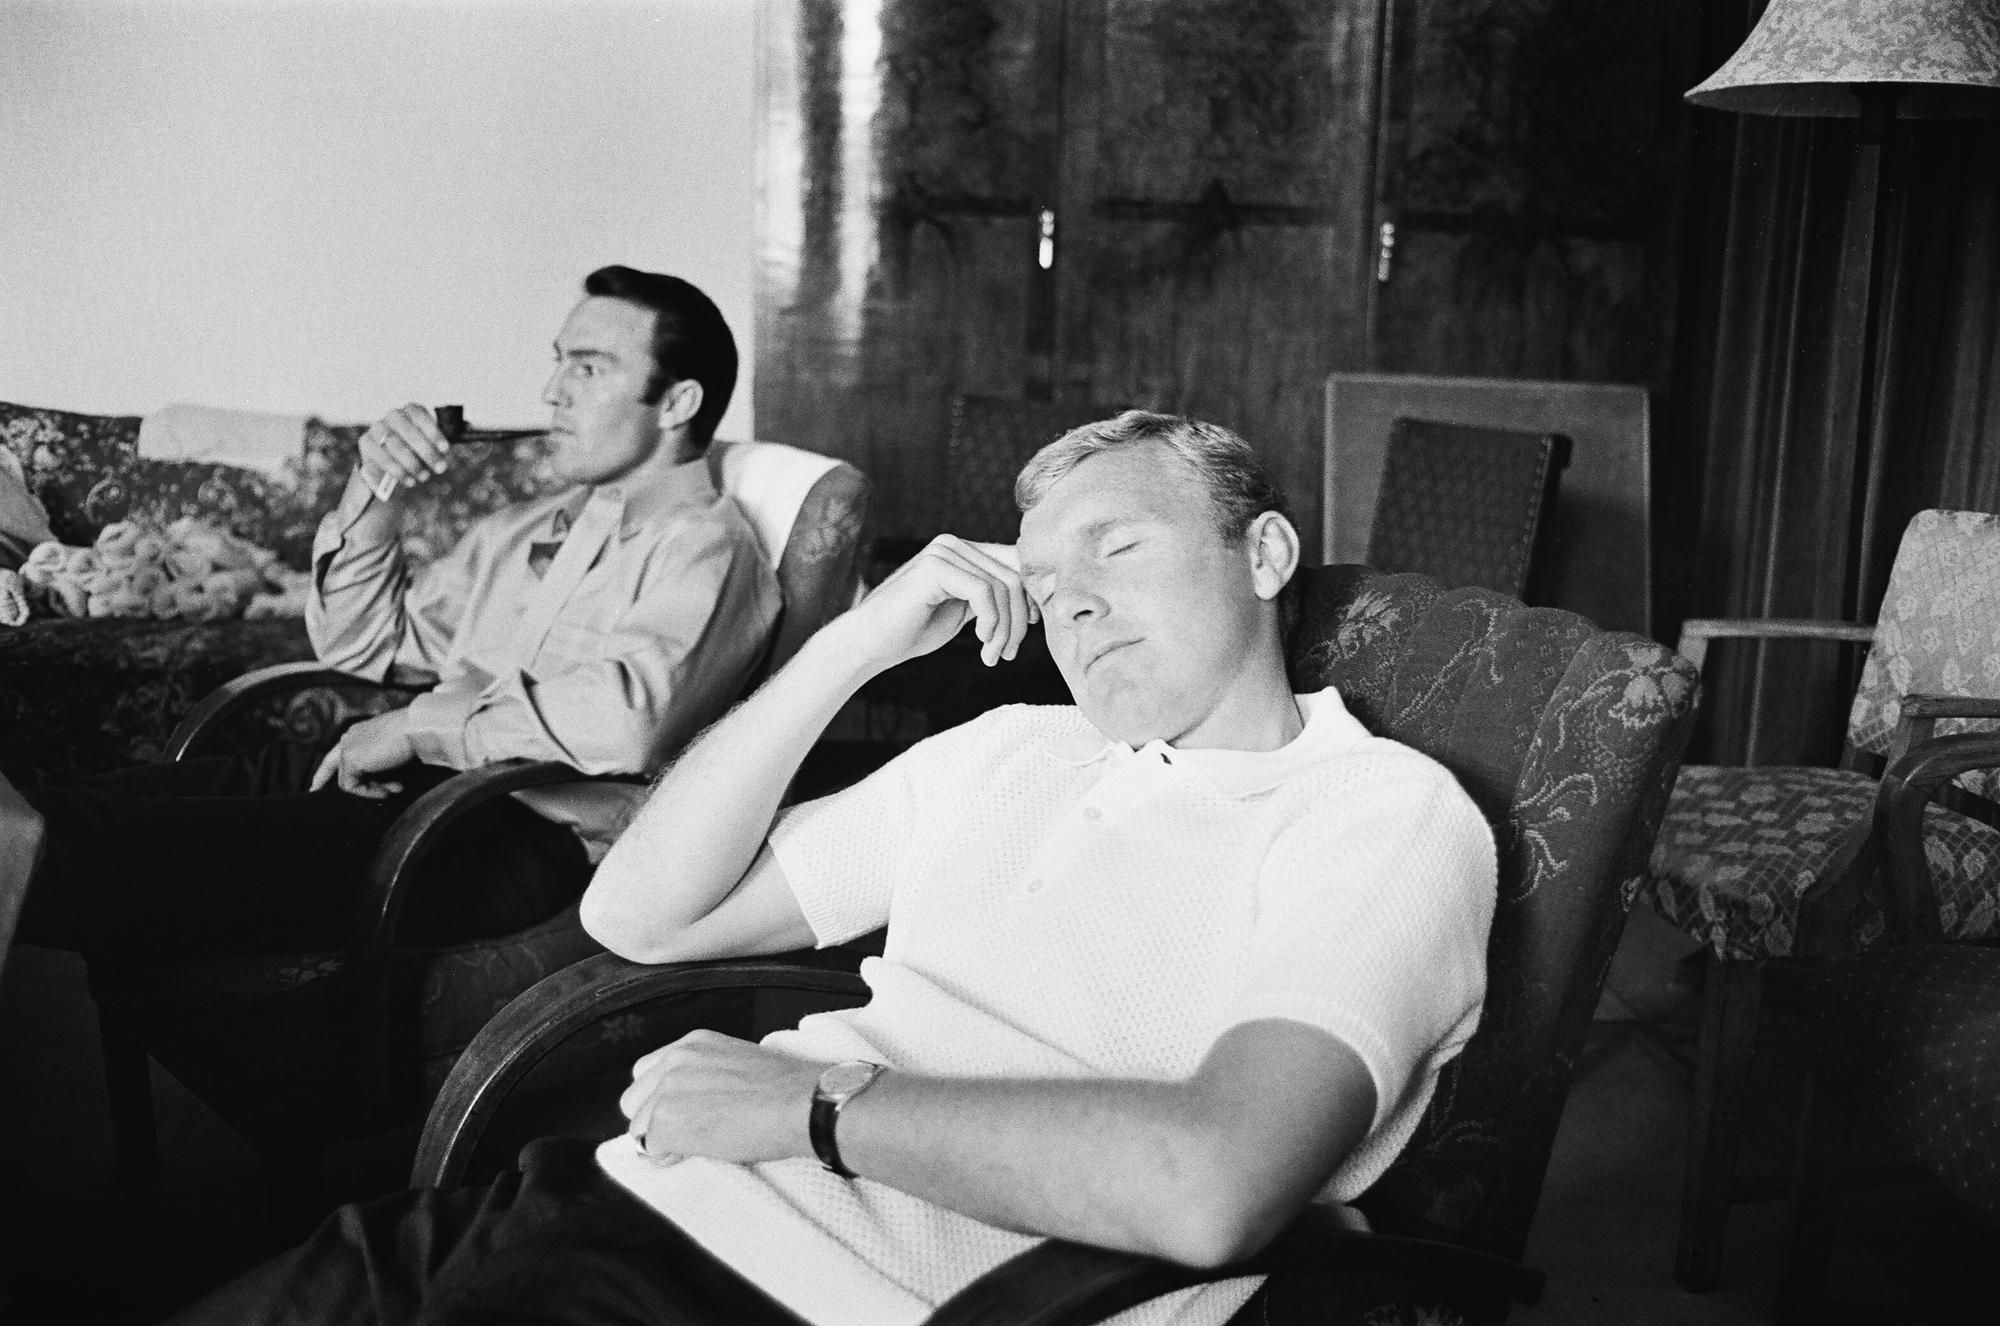 1966 World Cup
The England squad at their base in Hendon where they stayed throughout the tournament.
Striker Jimmy Greaves (left) smokes a pipe while captain Bobby Moore has a nap.
July 1966.